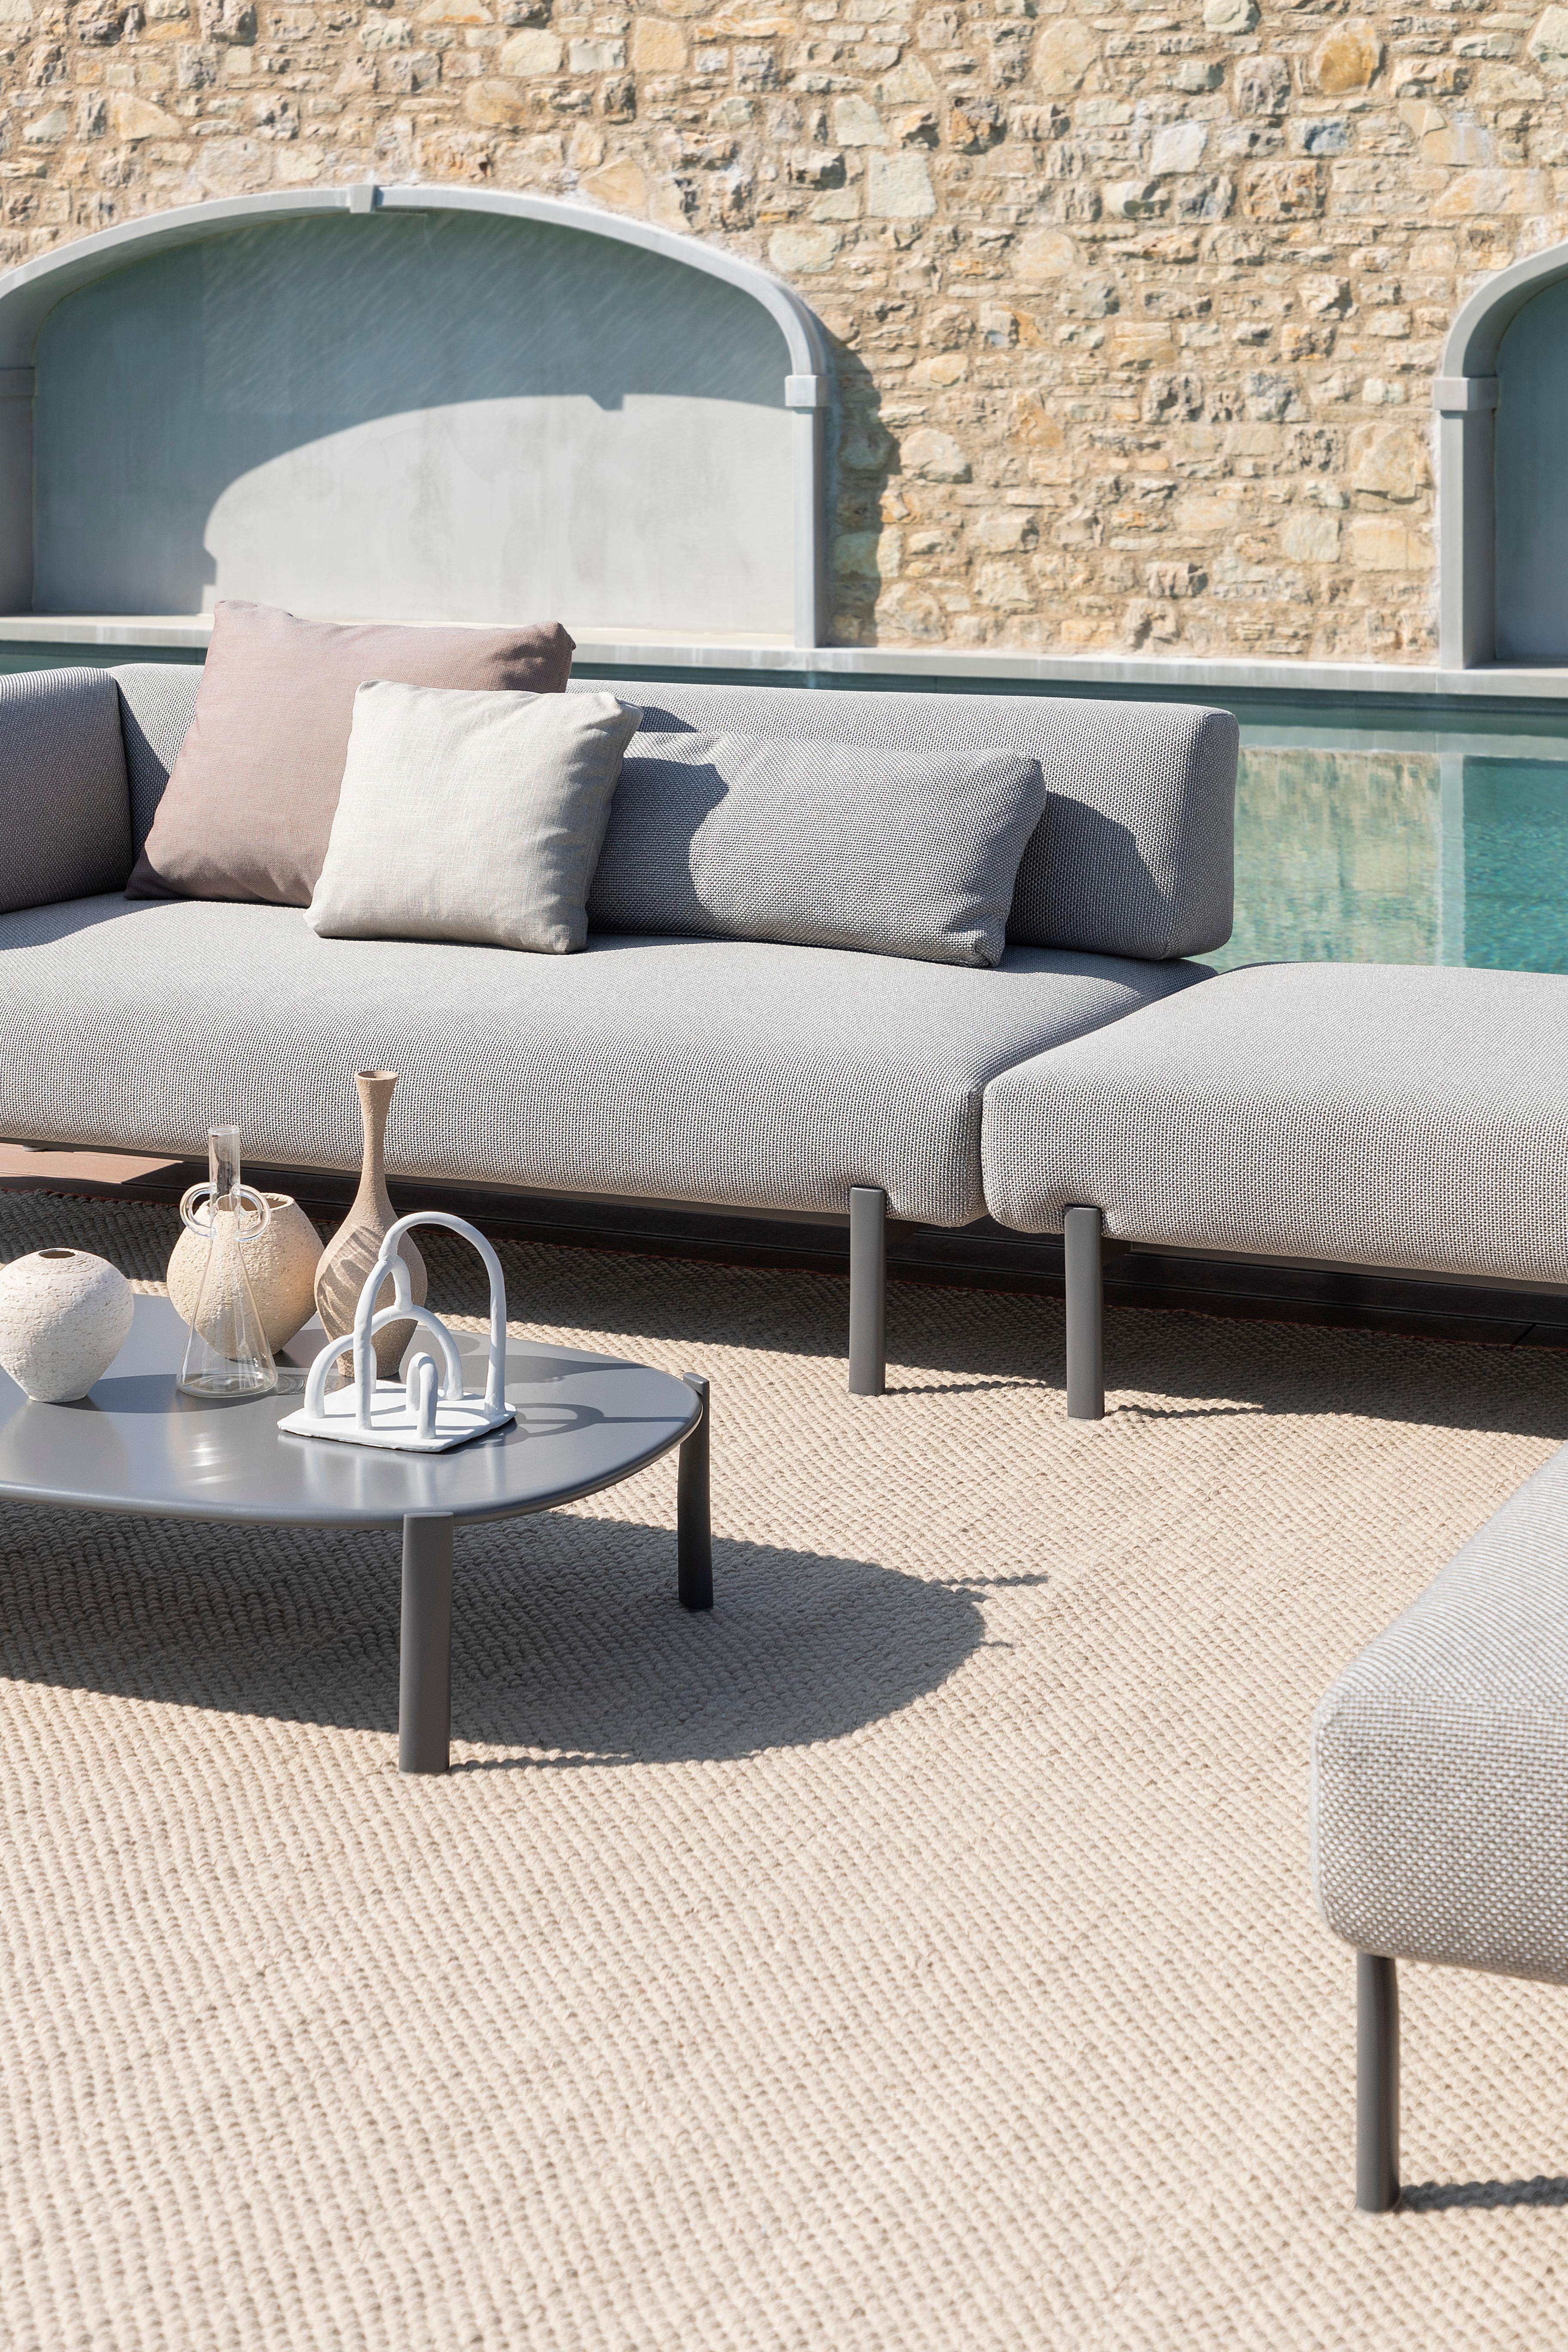 Alias T05+T07 Ten Outdoor Sofa Set and Pouf in White with Sand Lacquered Aluminum Frame by PearsonLloyd

Modular corner element for outdoor use with lacquered die-cast aluminium legs and stainless steel frame.Seat, back and armrest with removable